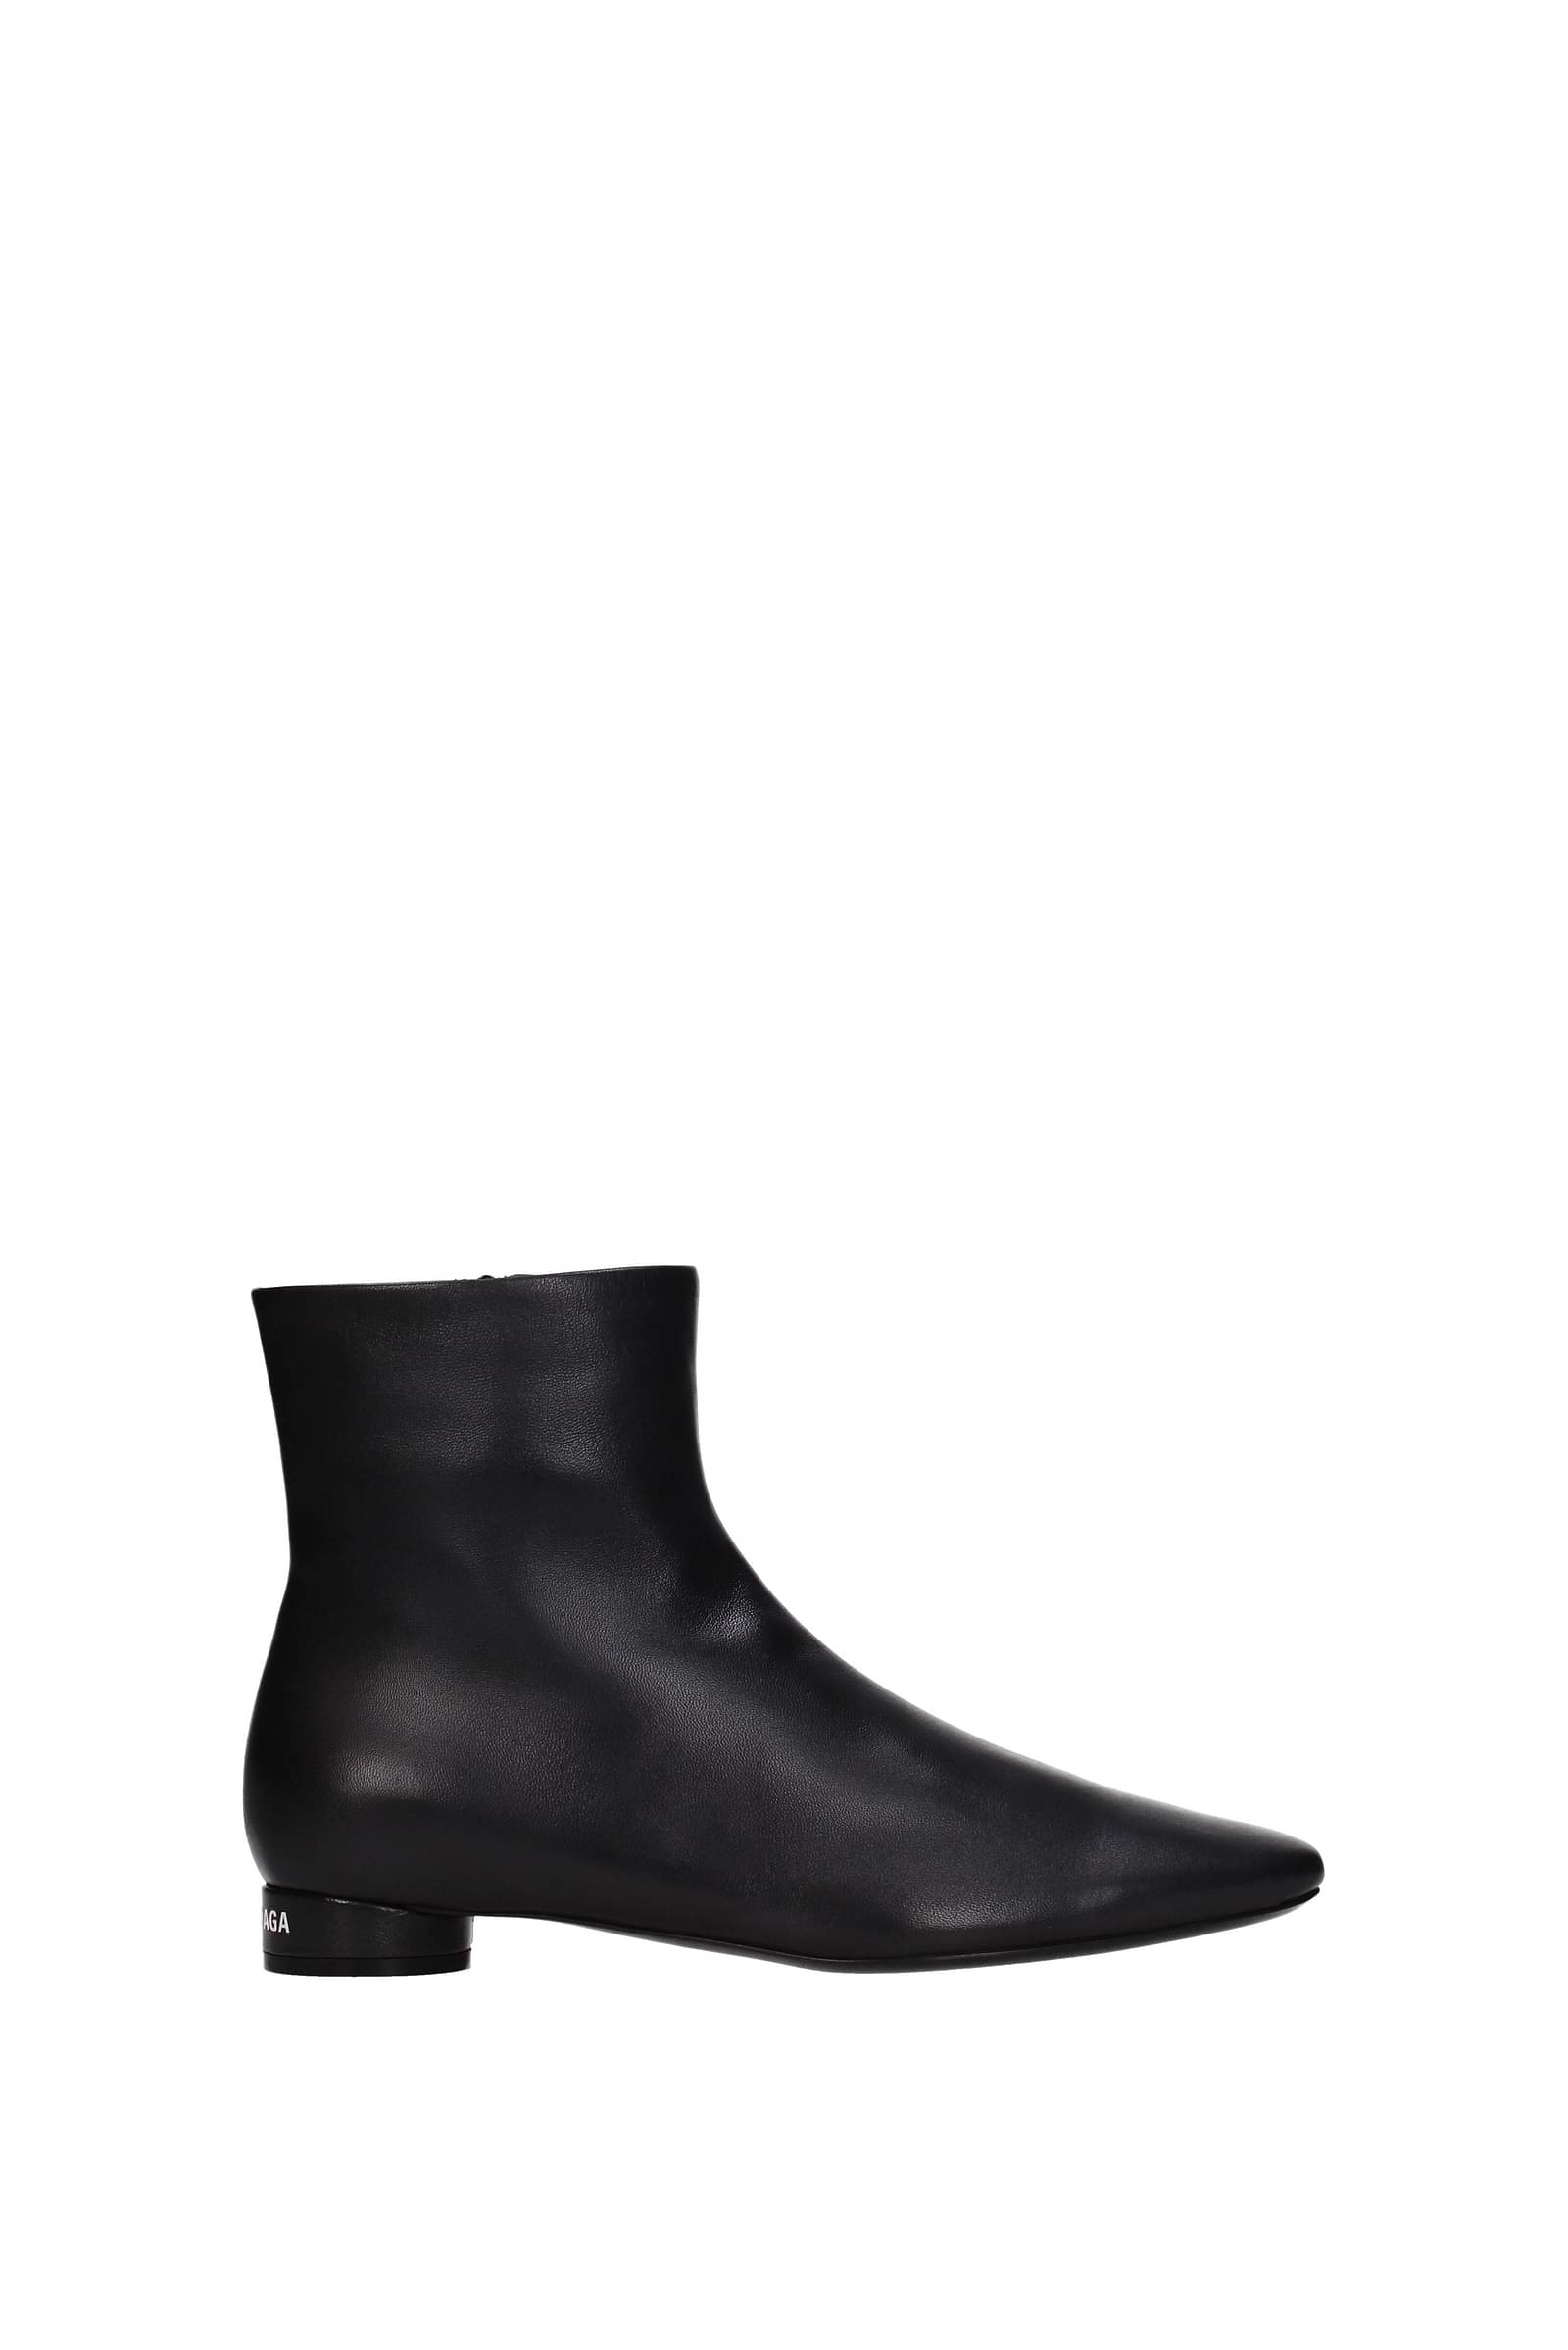 Balenciaga Womens Ankle Boots  SpringSummer and FallWinter Collections   YOOX